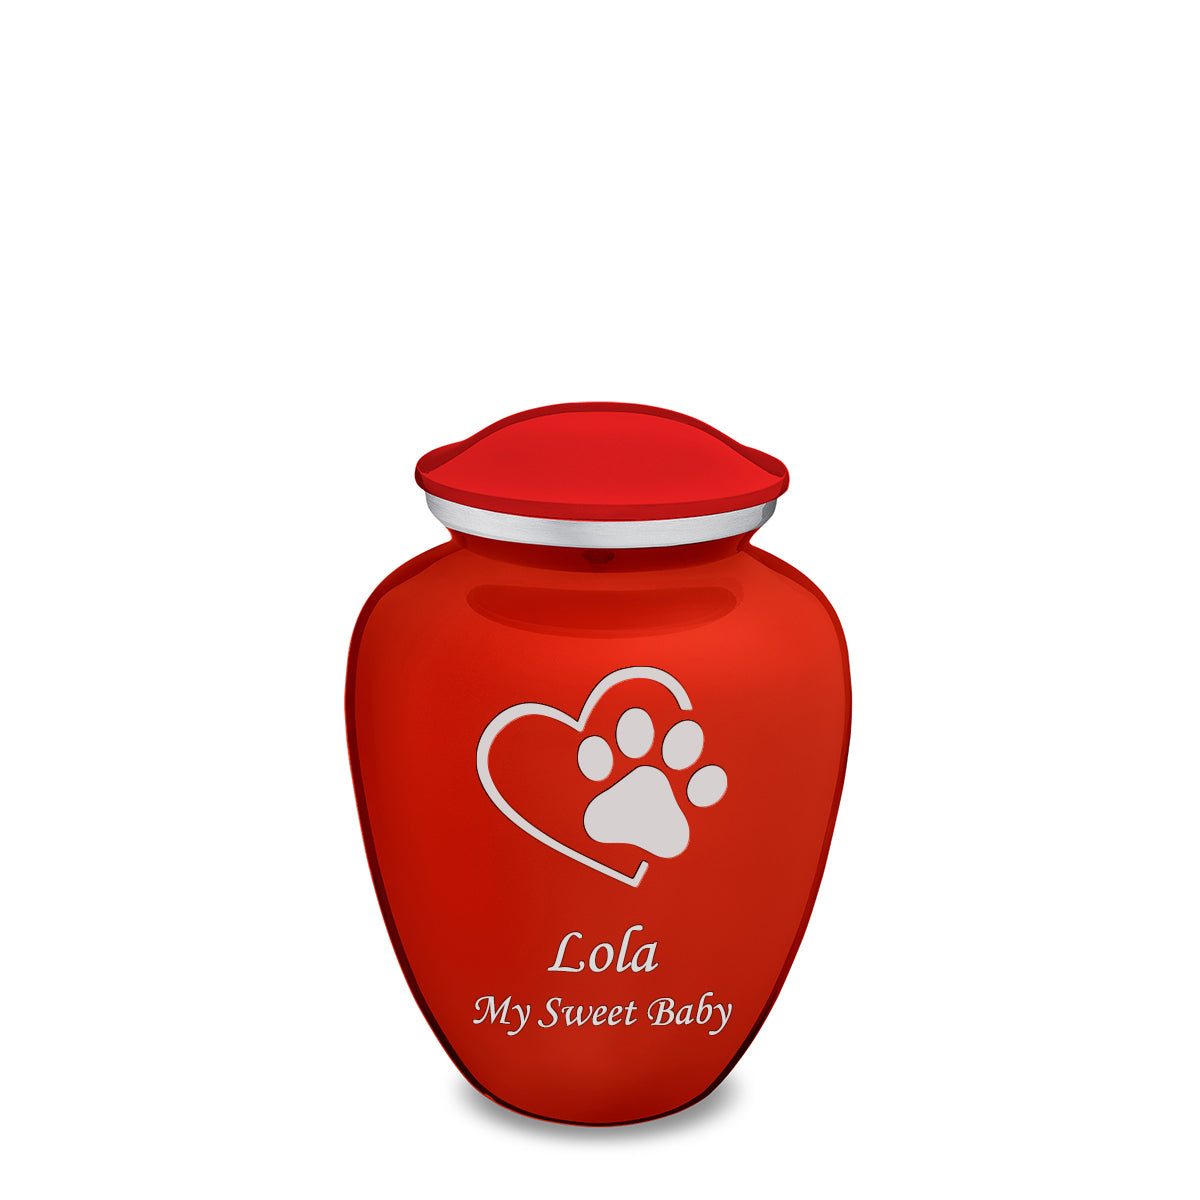 Medium Embrace Bright Red Single Paw Heart Pet Cremation Urn